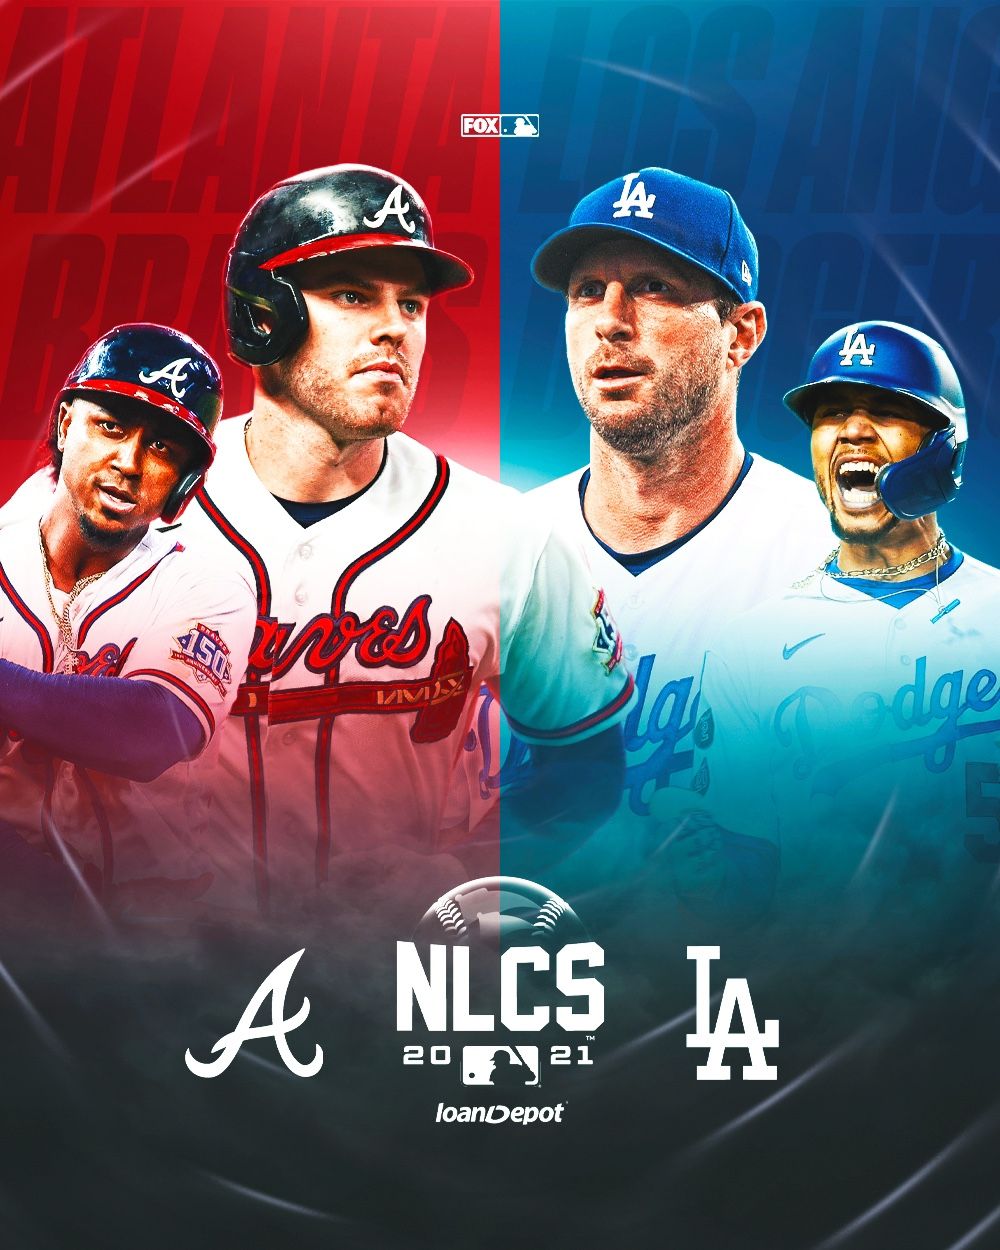 Dodgers vs Braves Today Game 3 NLCS